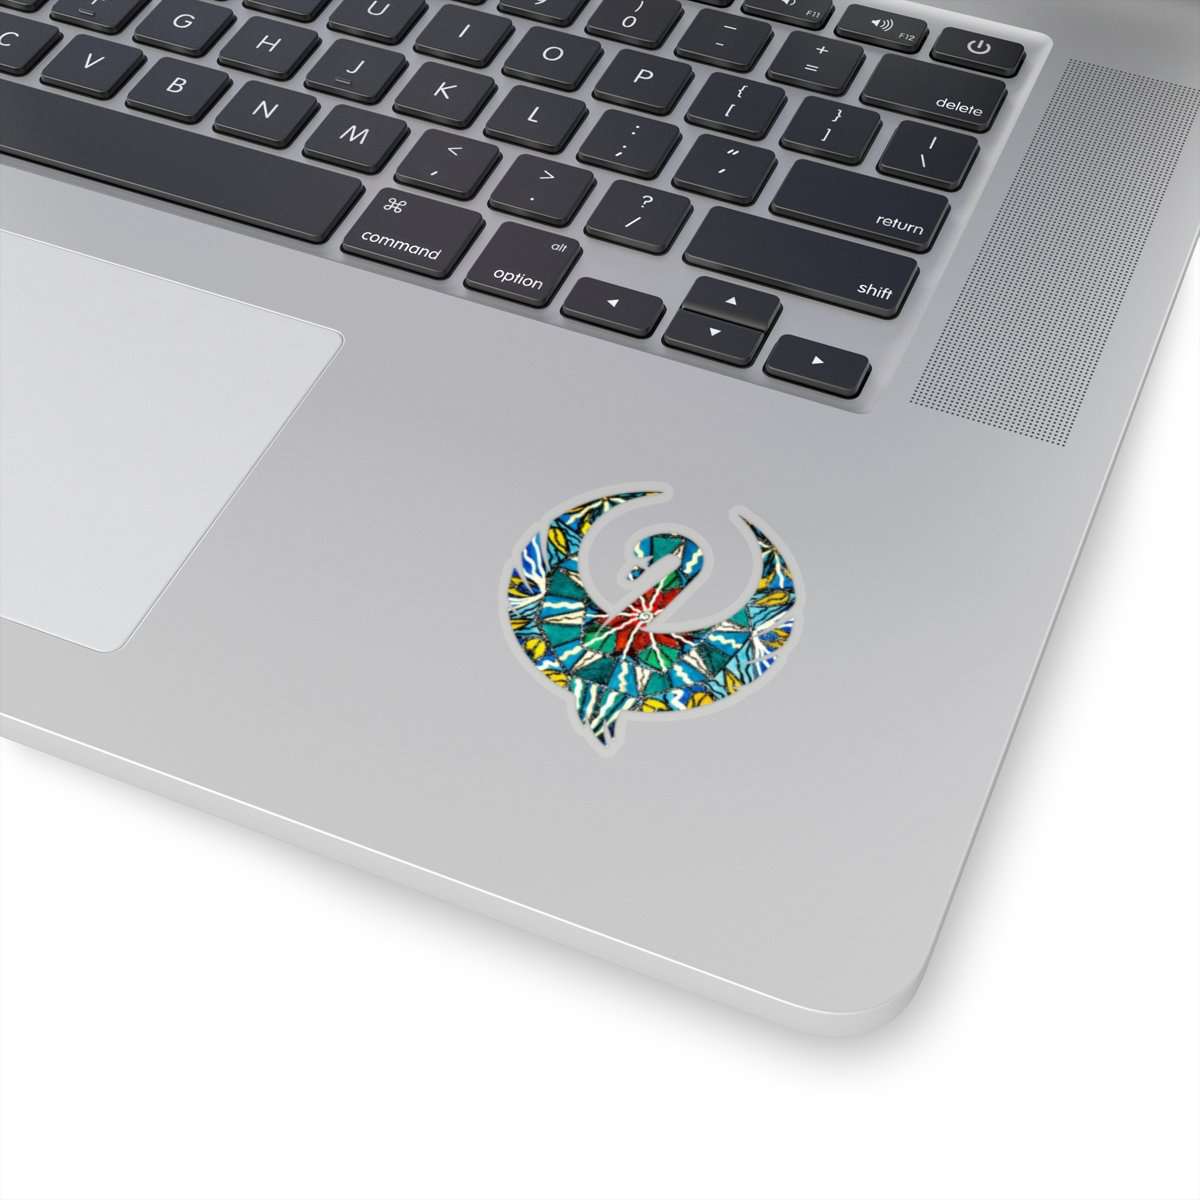 the-official-source-for-island-swan-stickers-online-hot-sale_1.jpg